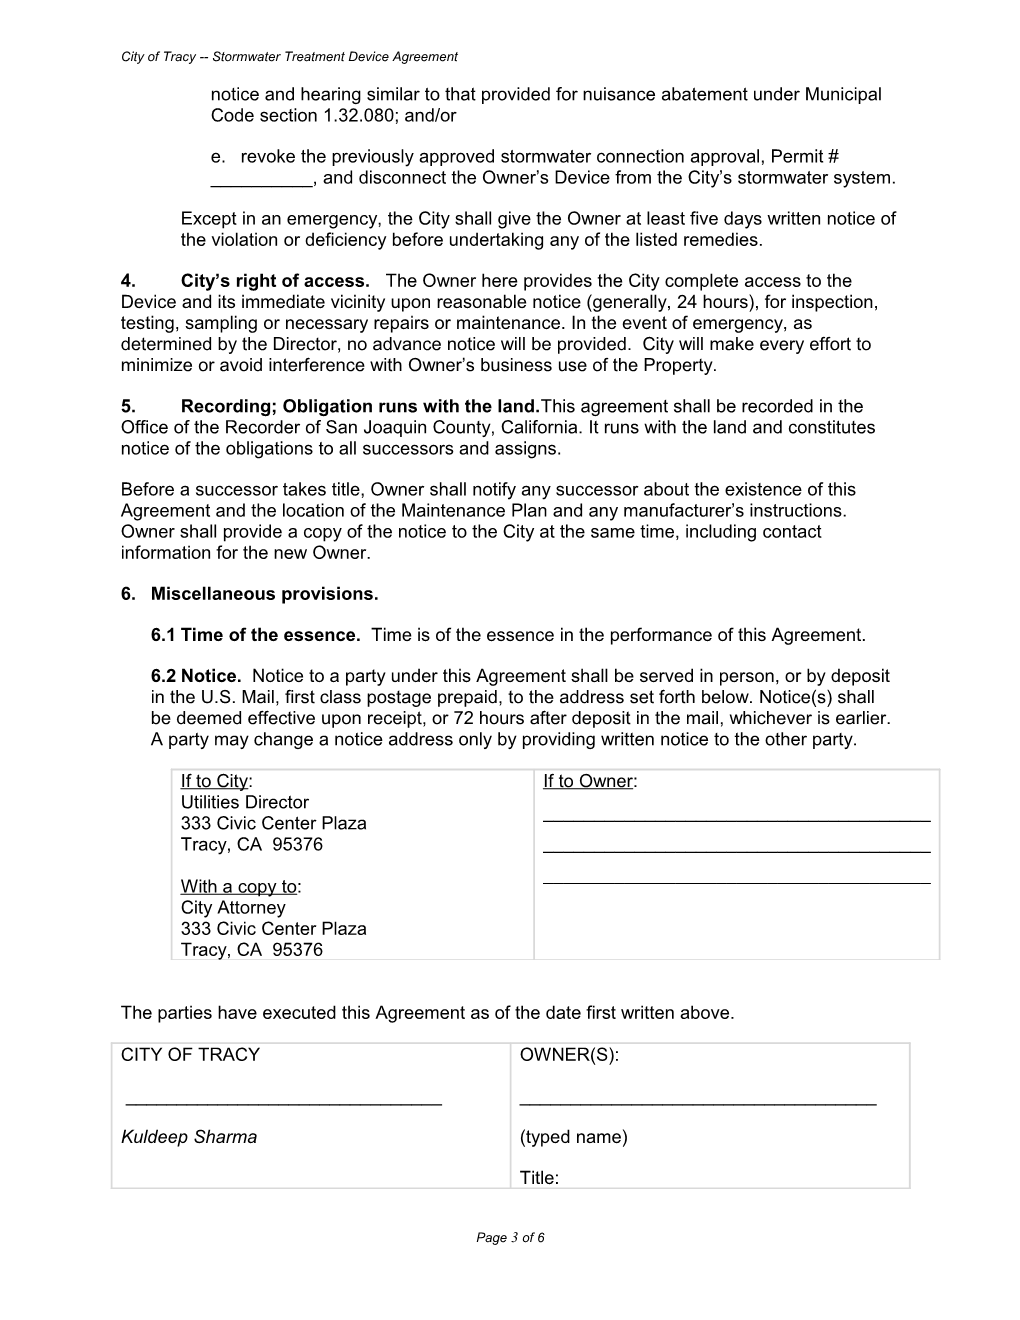 City of Tracy Stormwater Treatment Device Agreement